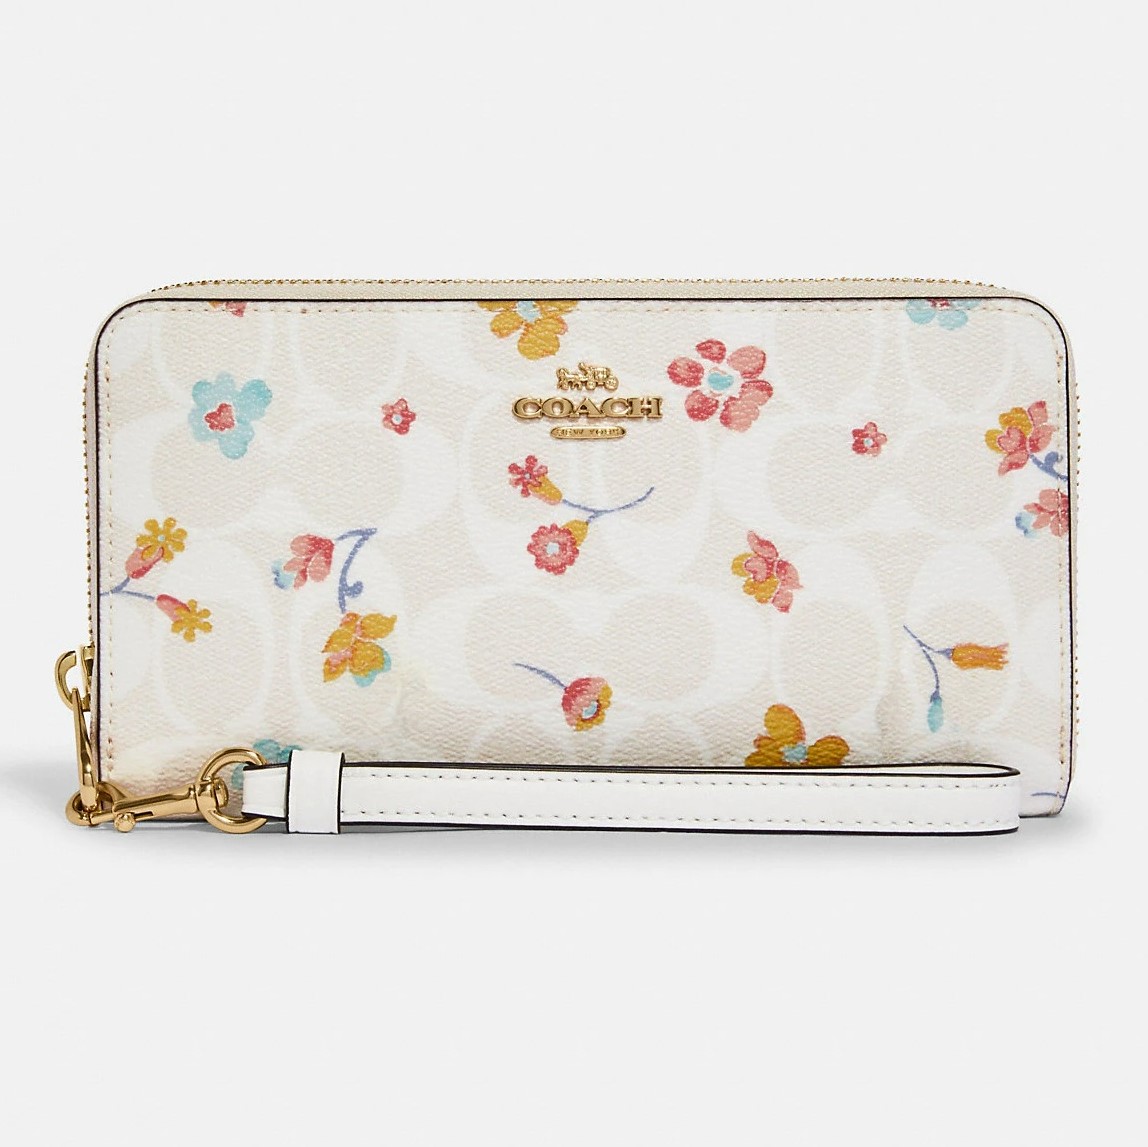  VÍ COACH LONG ZIP AROUND WALLET IN SIGNATURE CANVAS WITH MYSTICAL FLORAL PRINT 1